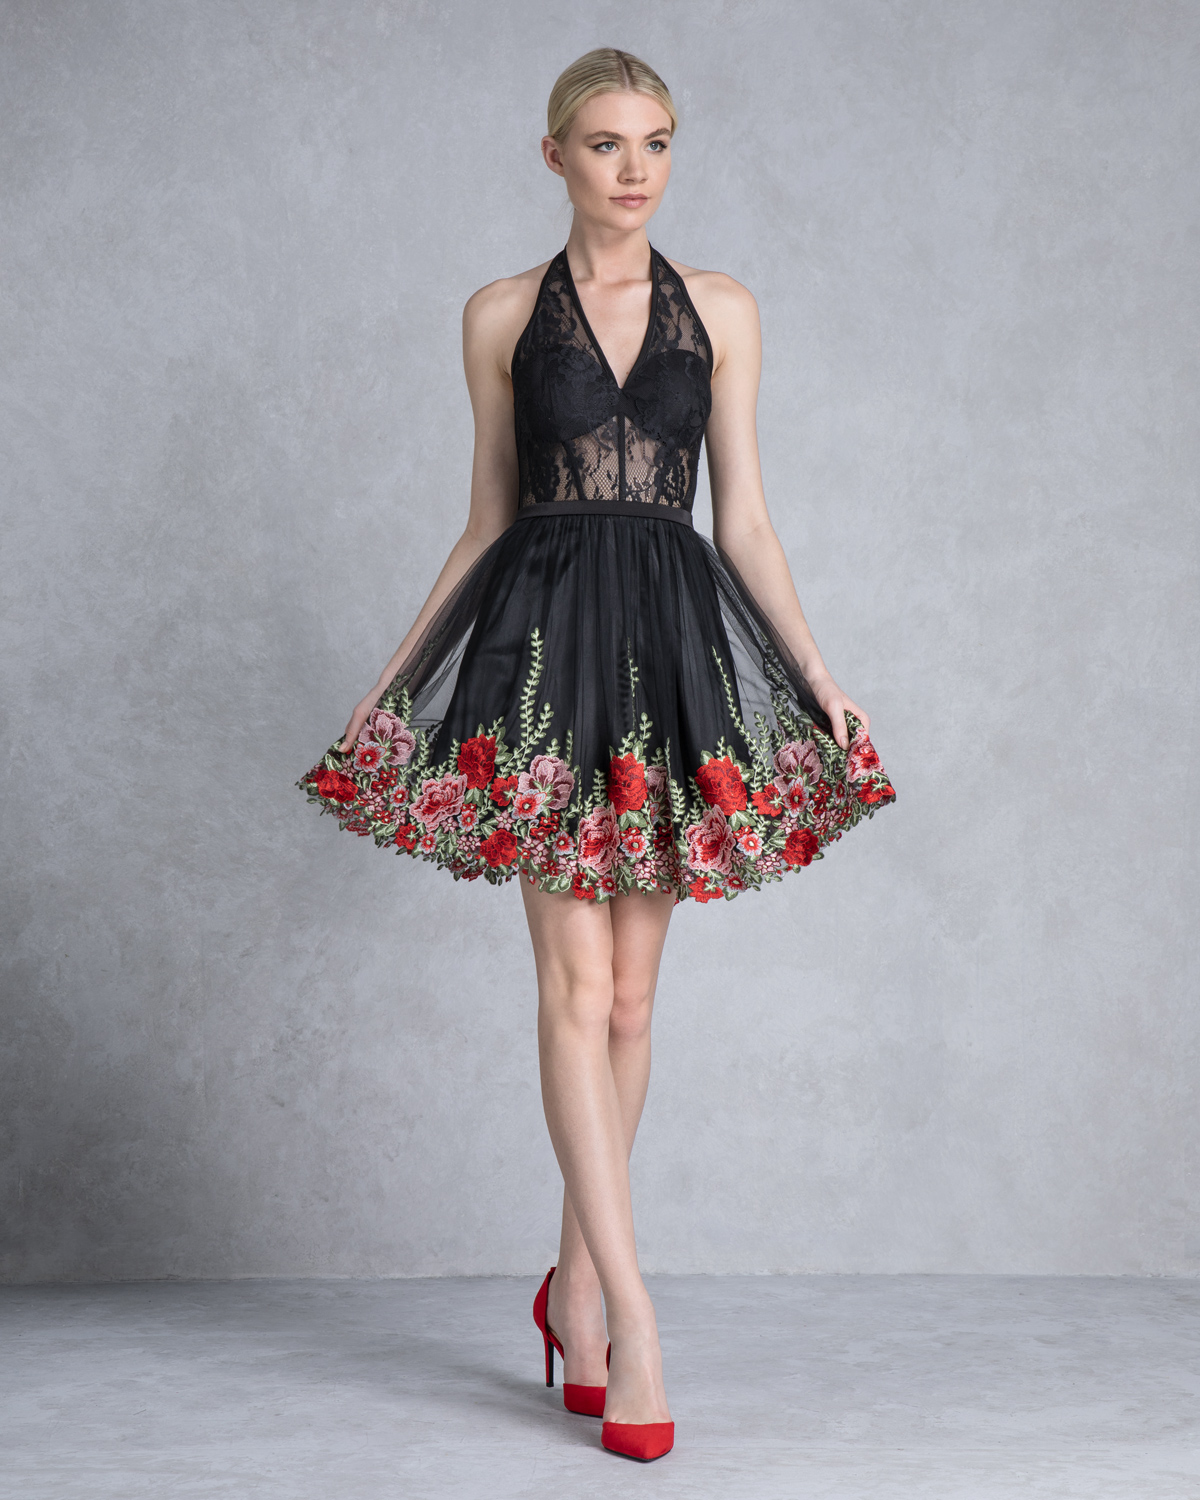 Коктейльные платья / Cocktail short dress with lace top and flowers on the skirt